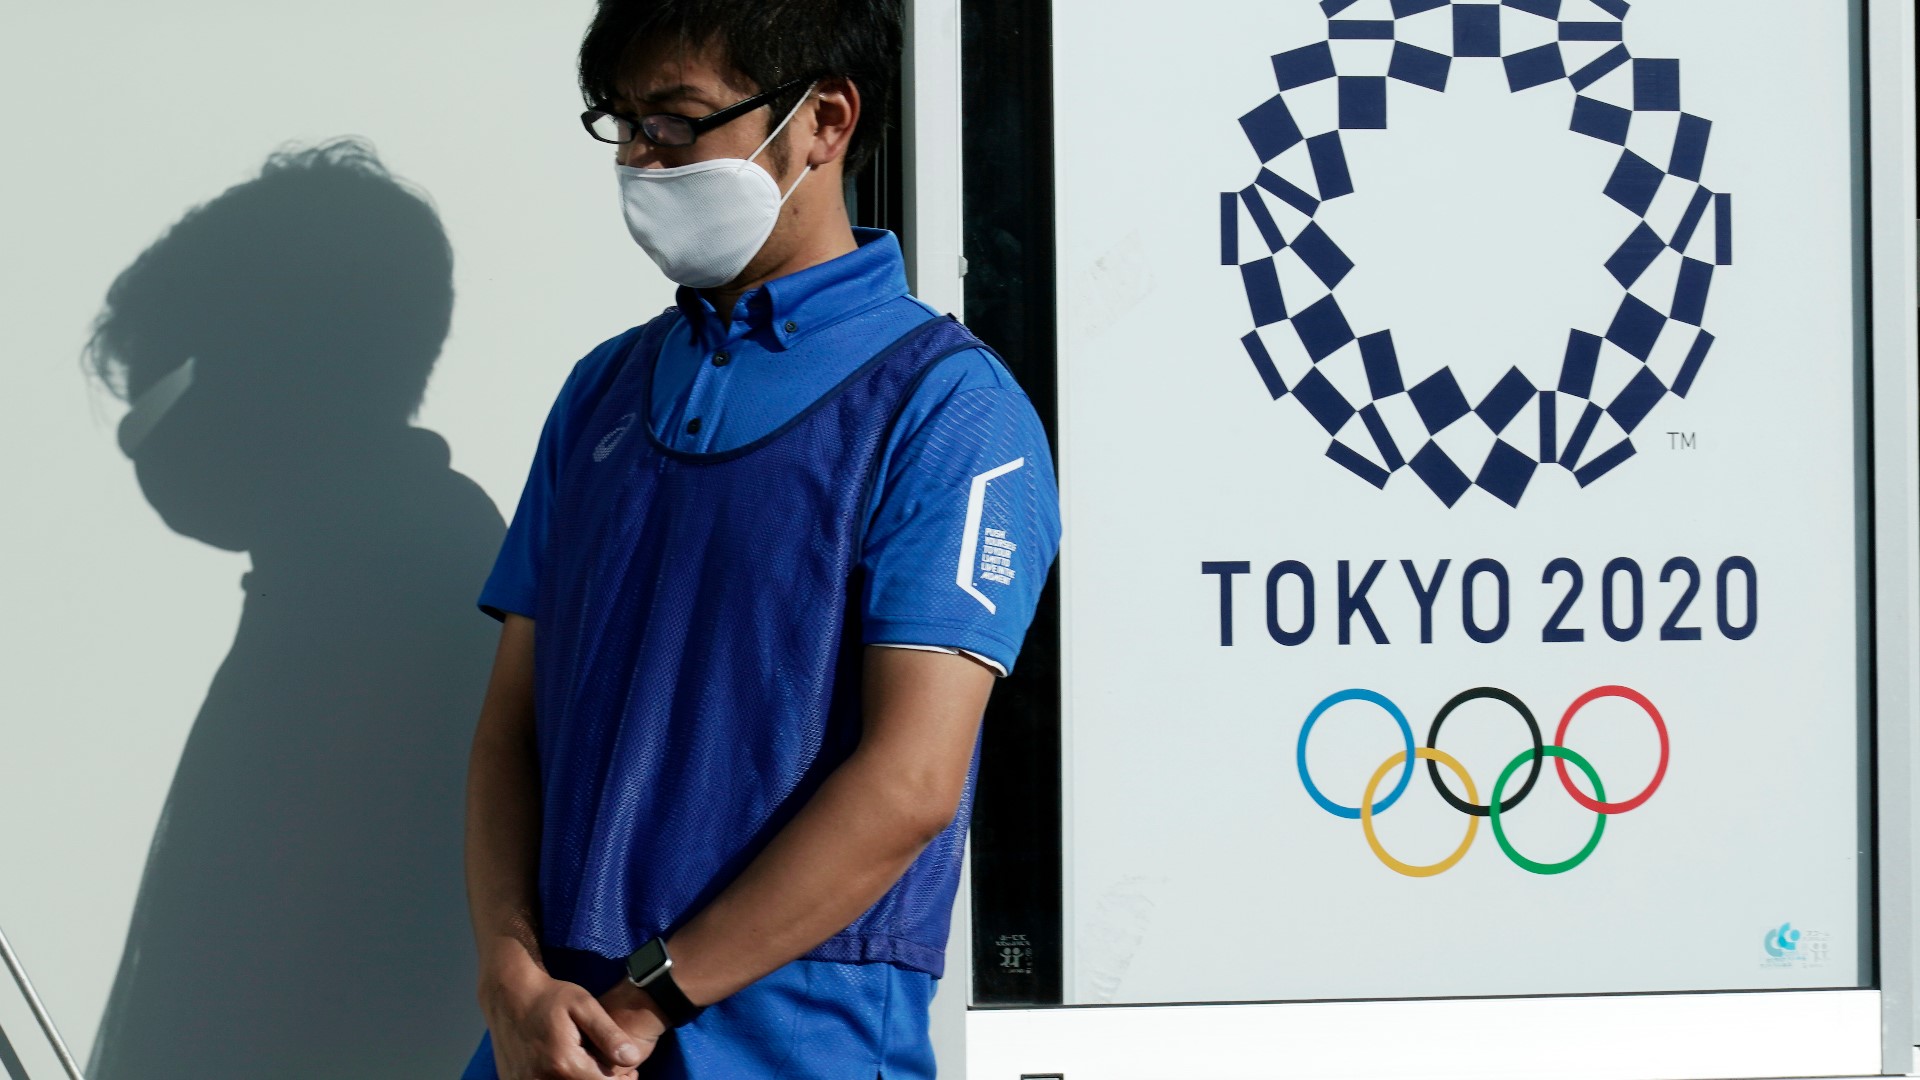 Olympics organizers are adamant the Tokyo Olympics will happen, but that's what they were saying last year, too.